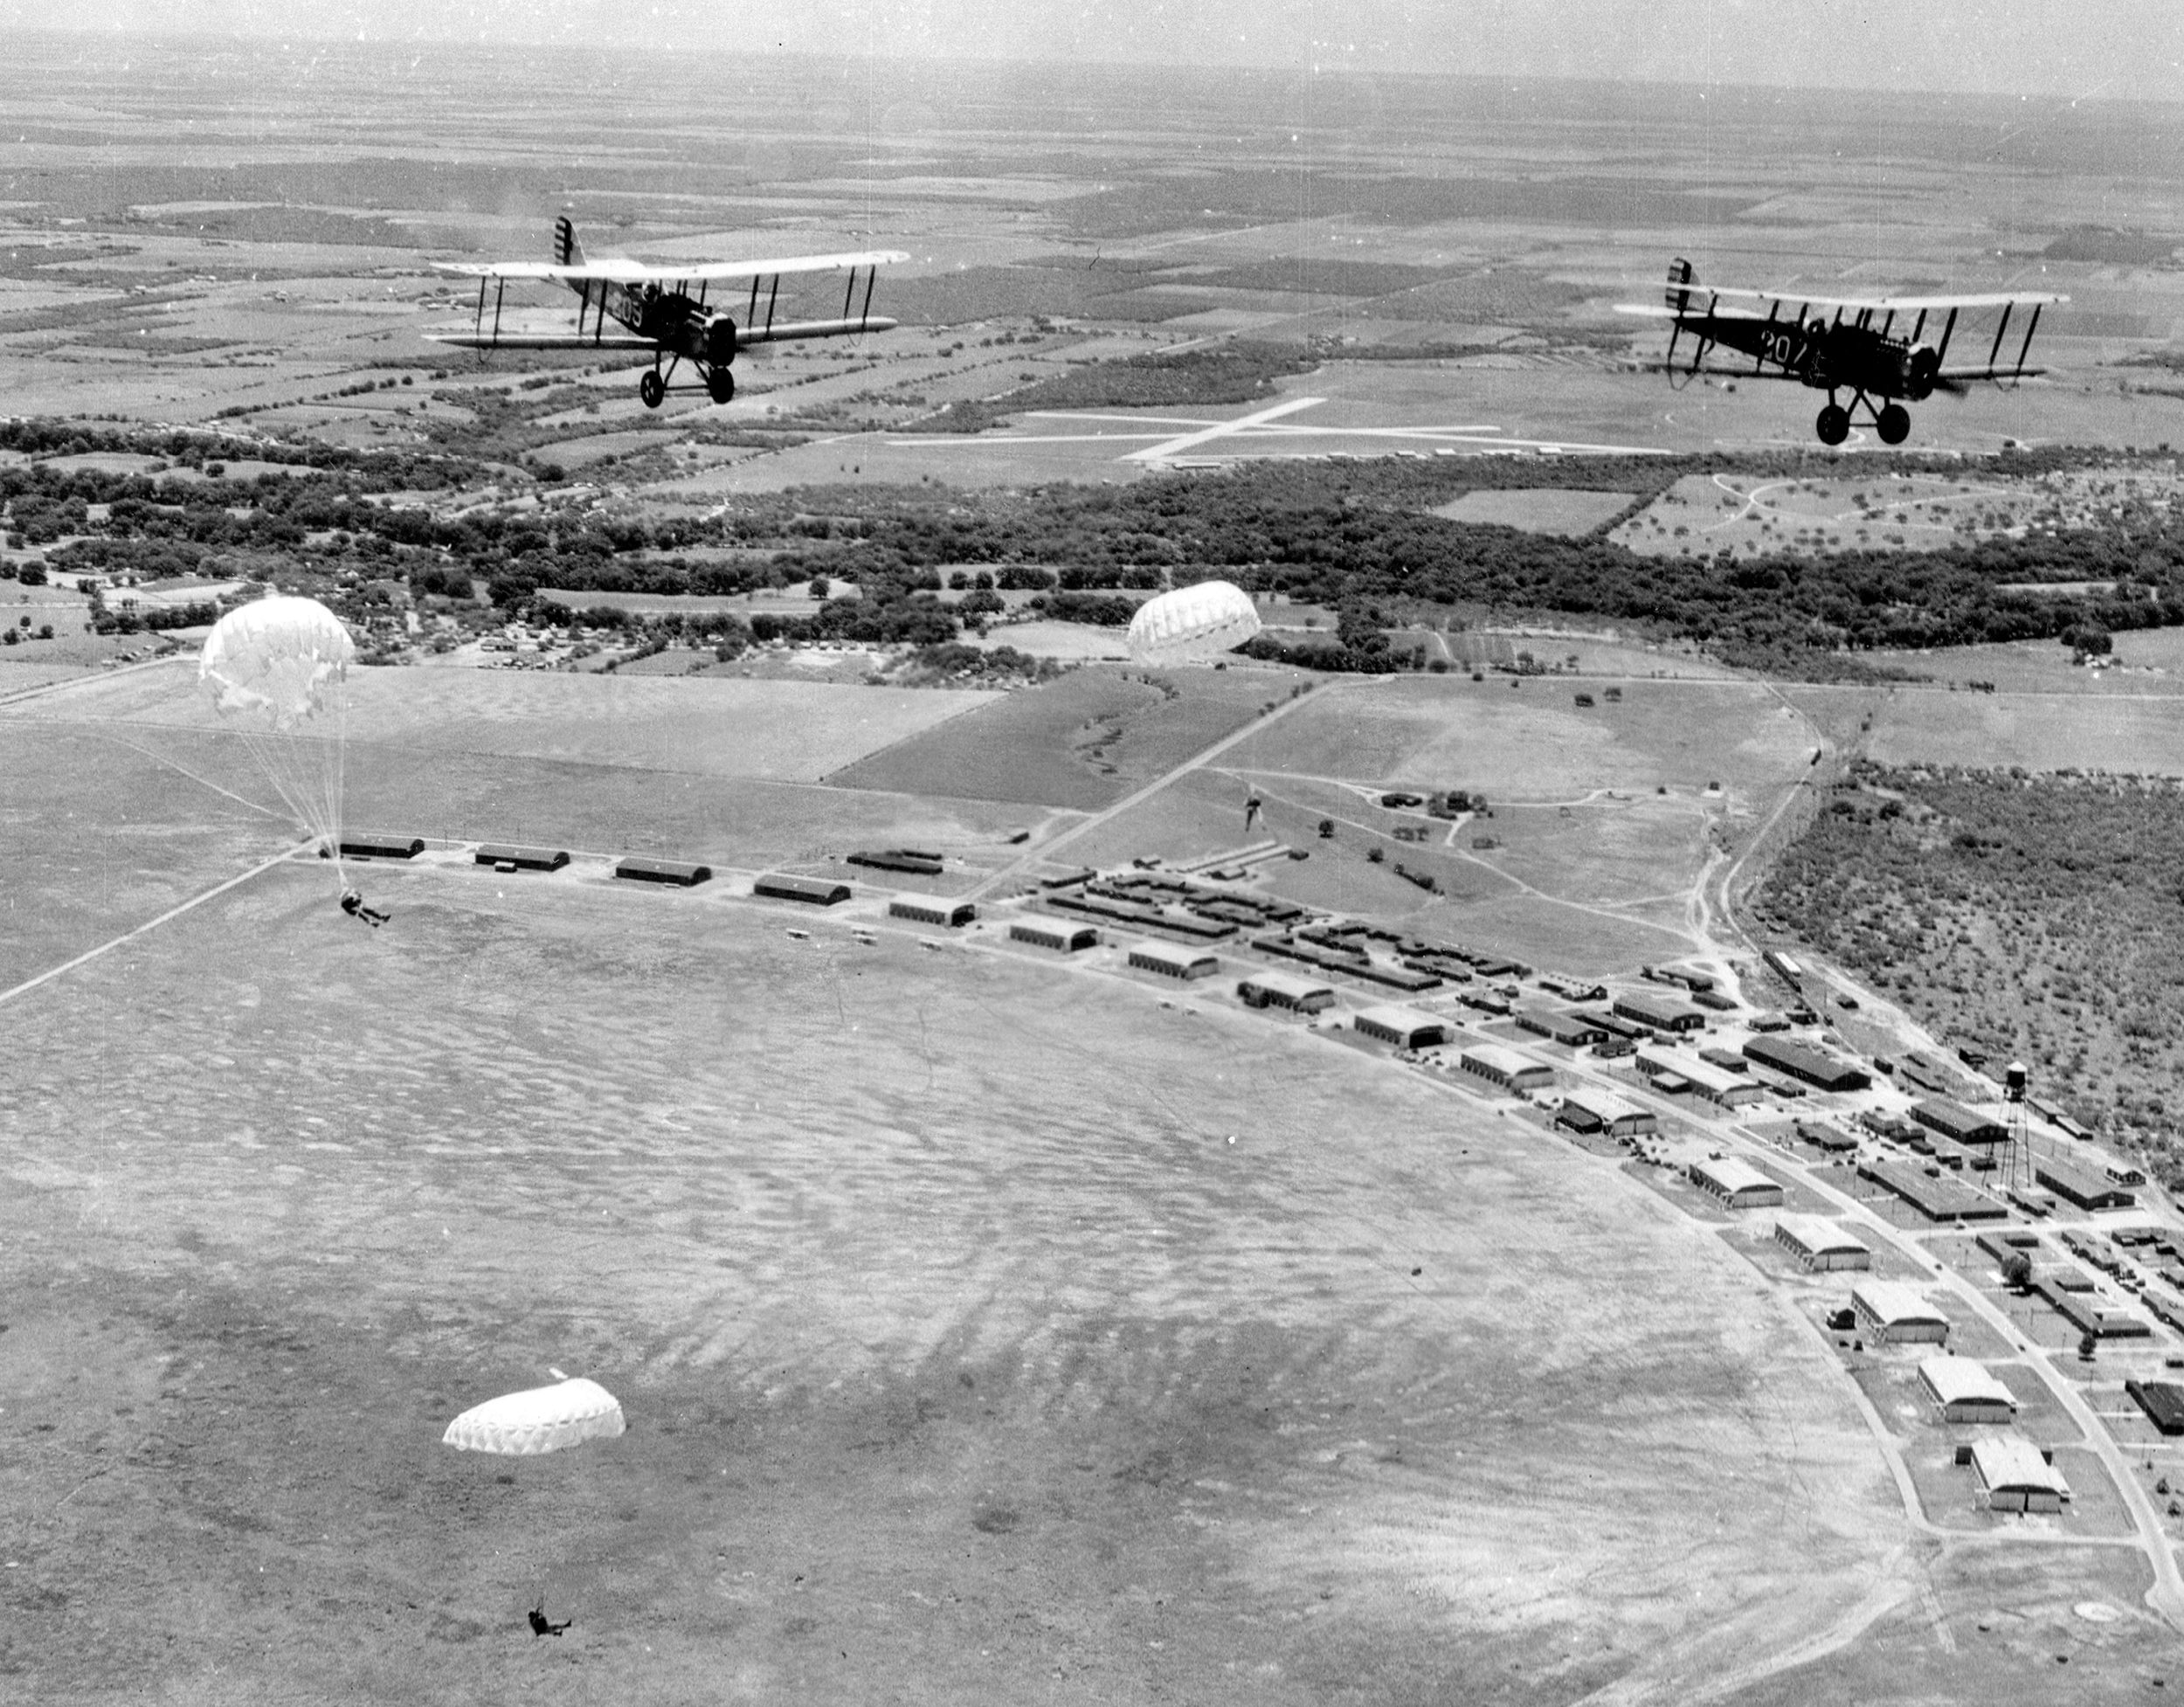 Army paratroopers jump from biplanes during an early airborne exercise at Brooks Field, Texas, in the mid-1920s. The military showed little interest in Airborne capability until the late 1930s.